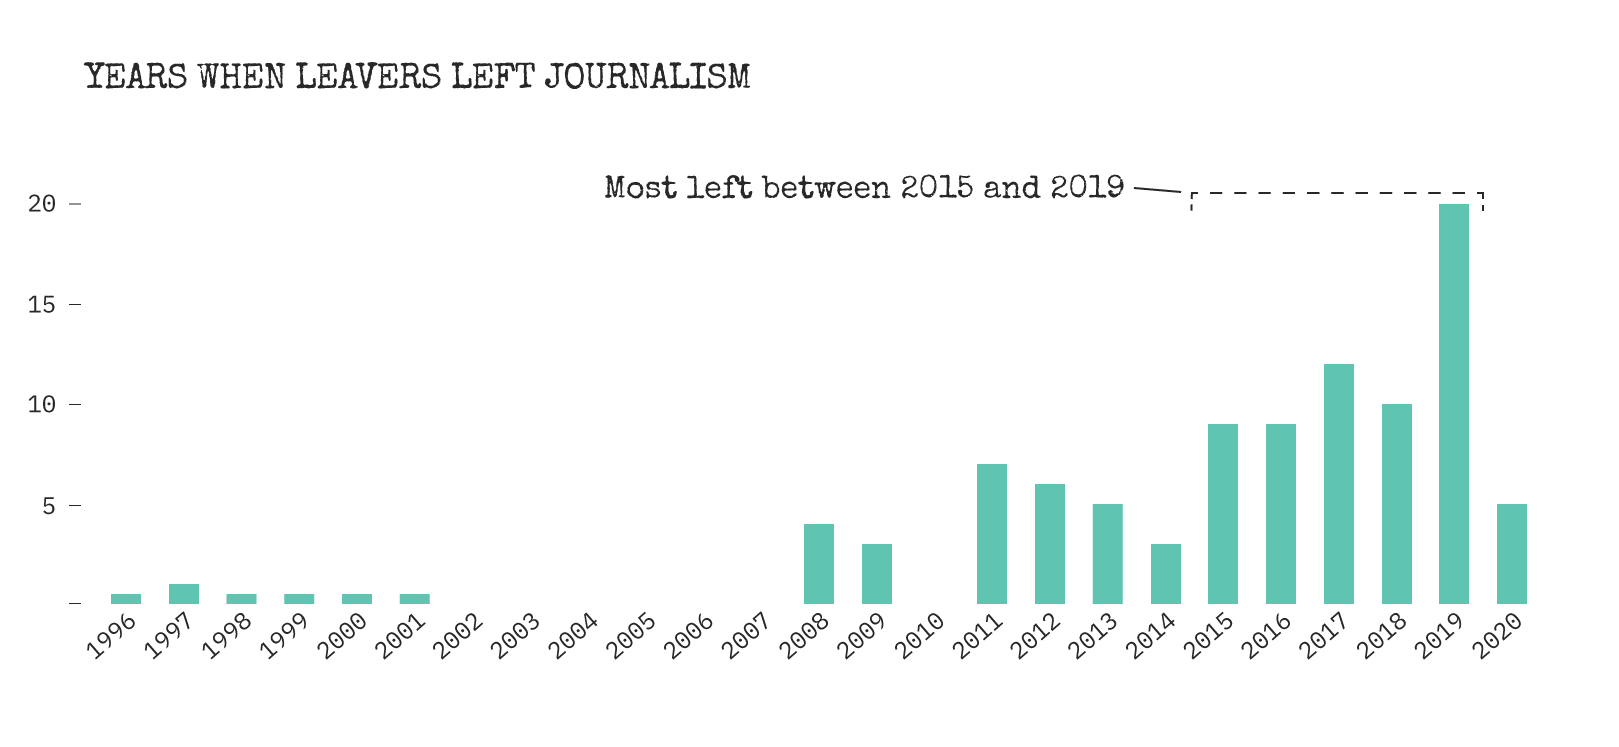 A timeline of years when Leavers left journalism